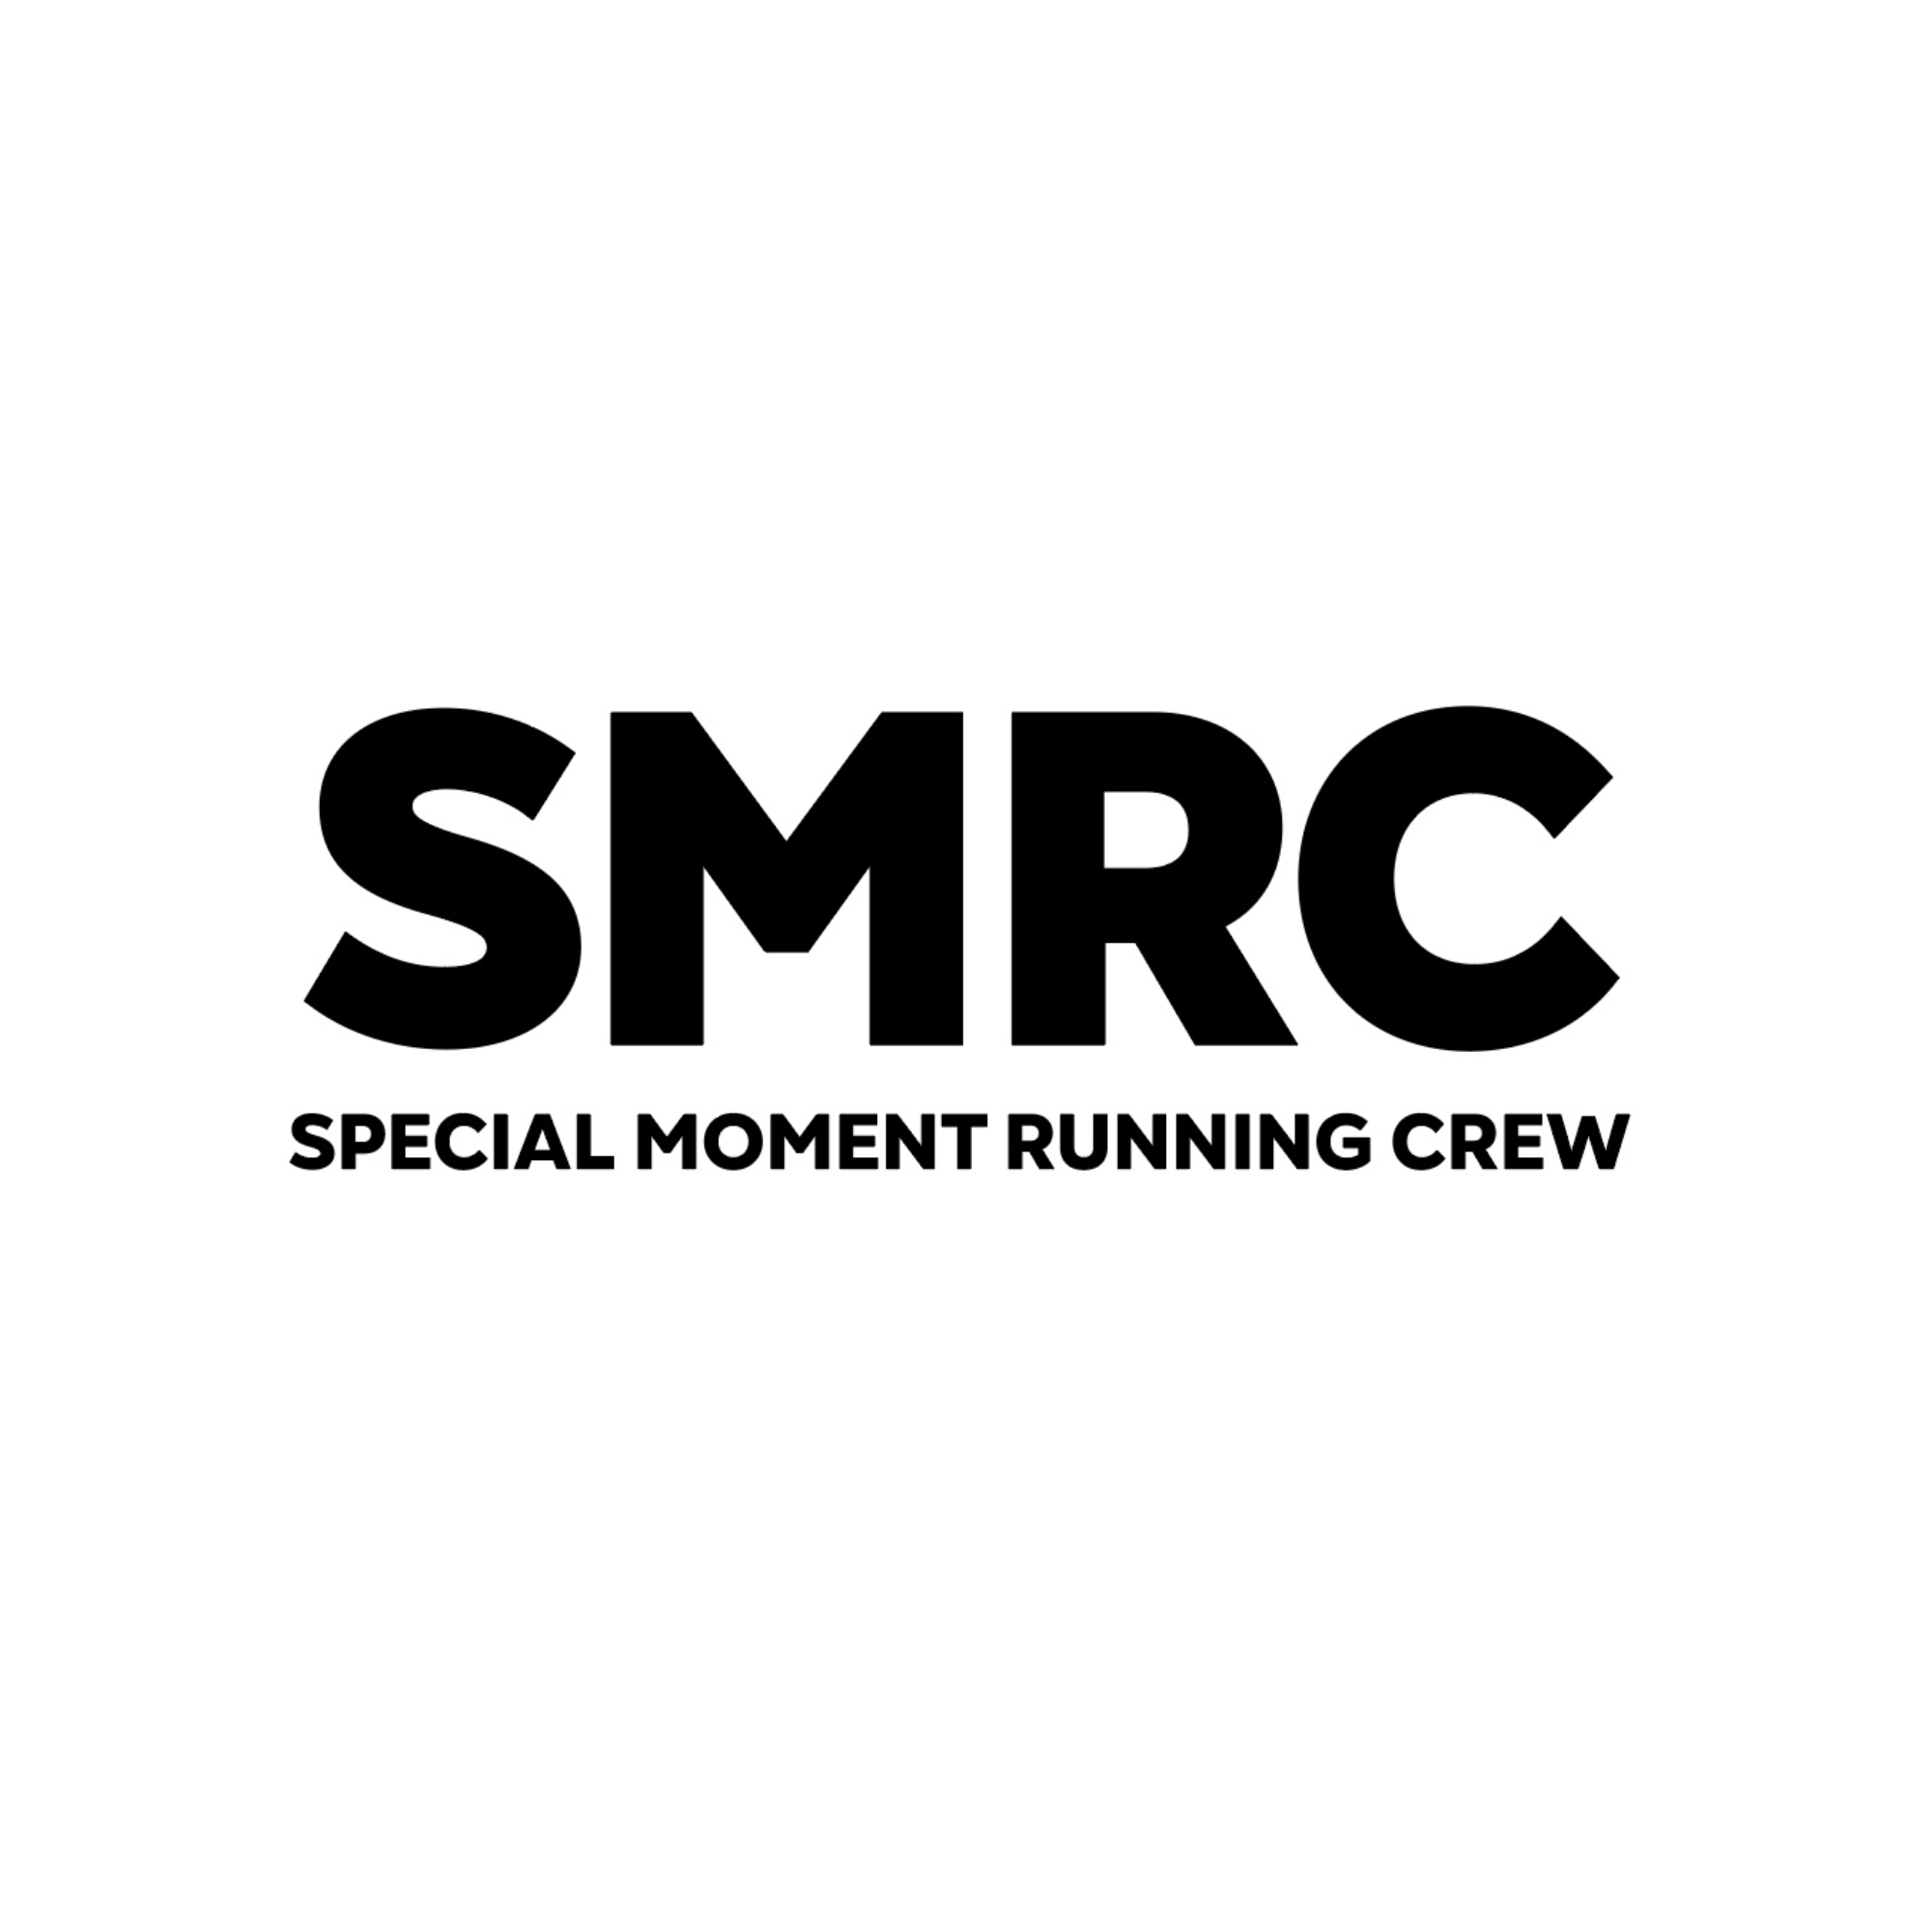 Special Moment Running Crew